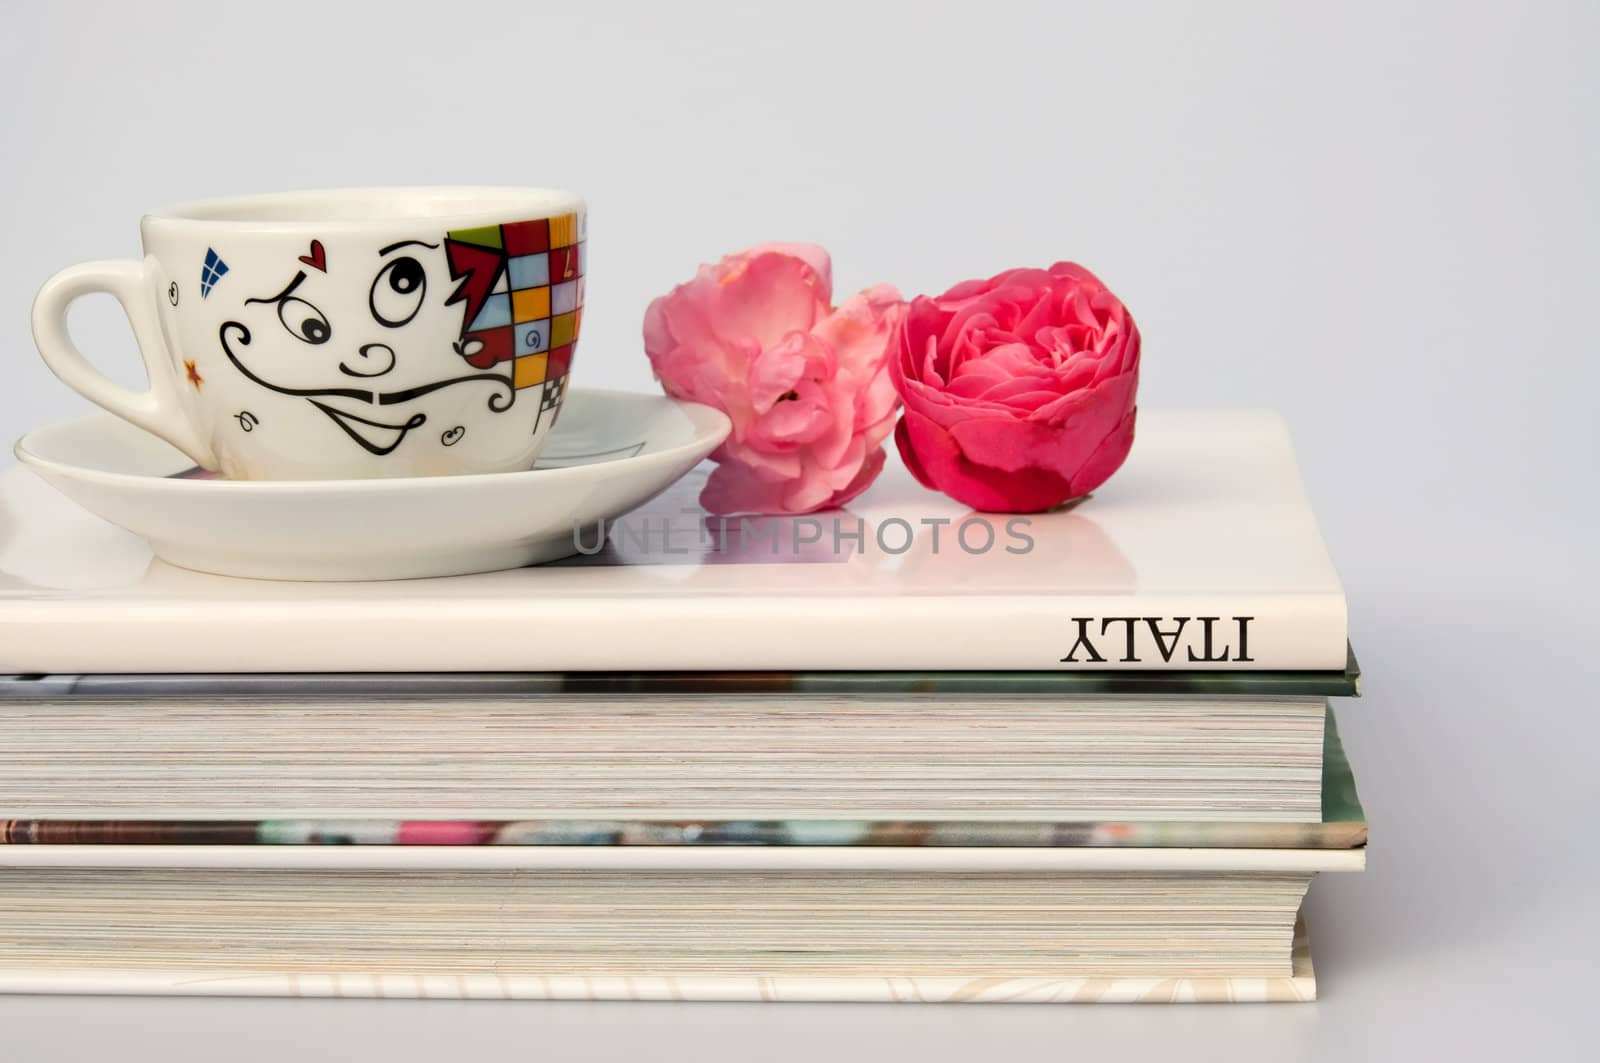 Coffee table books by GryT